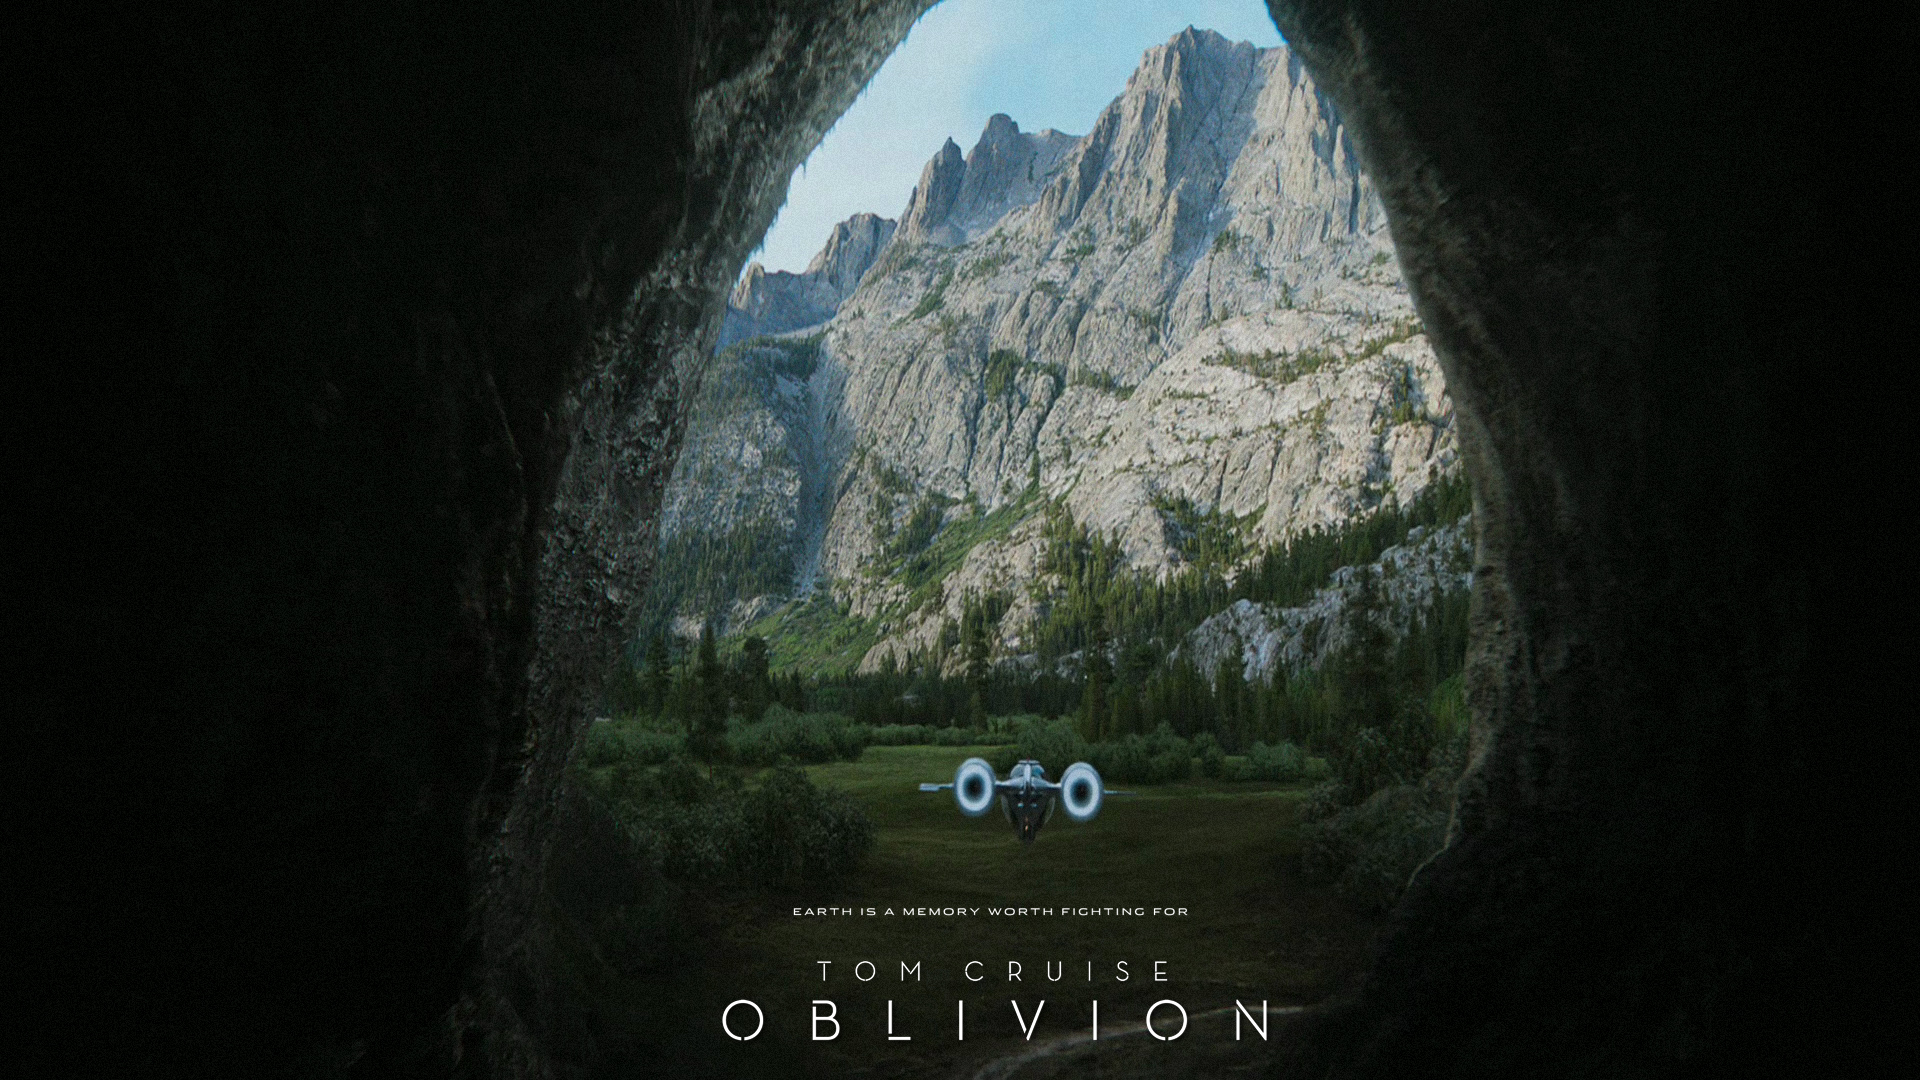 Of Oblivion The New Sci Fi Movie Starring Tom Cruise